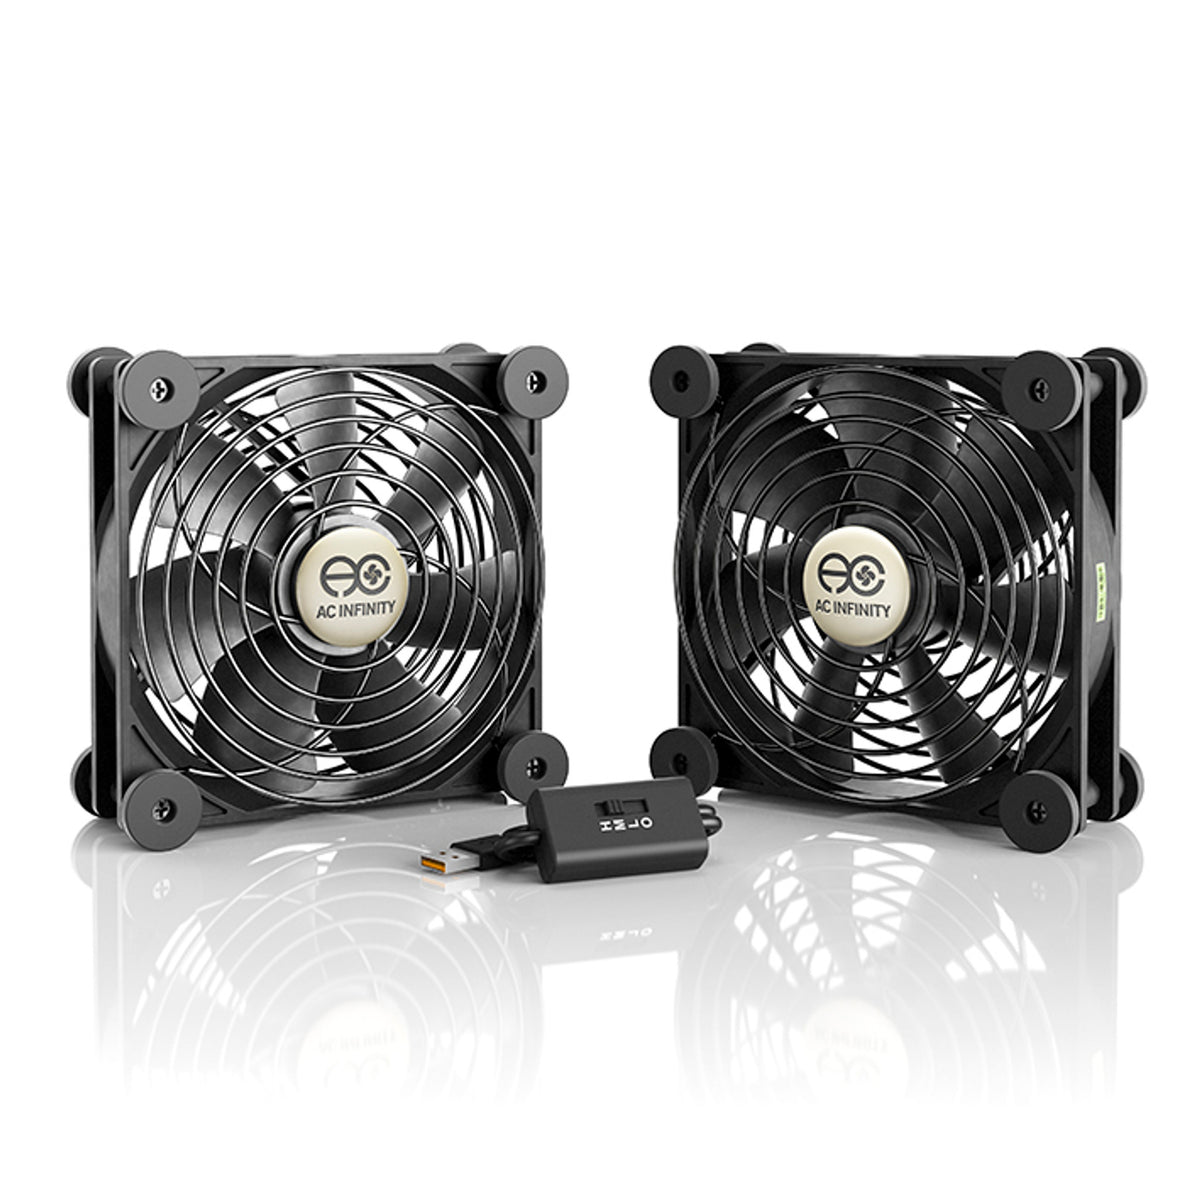 Multifans S7 Dual fans by AC Infinity